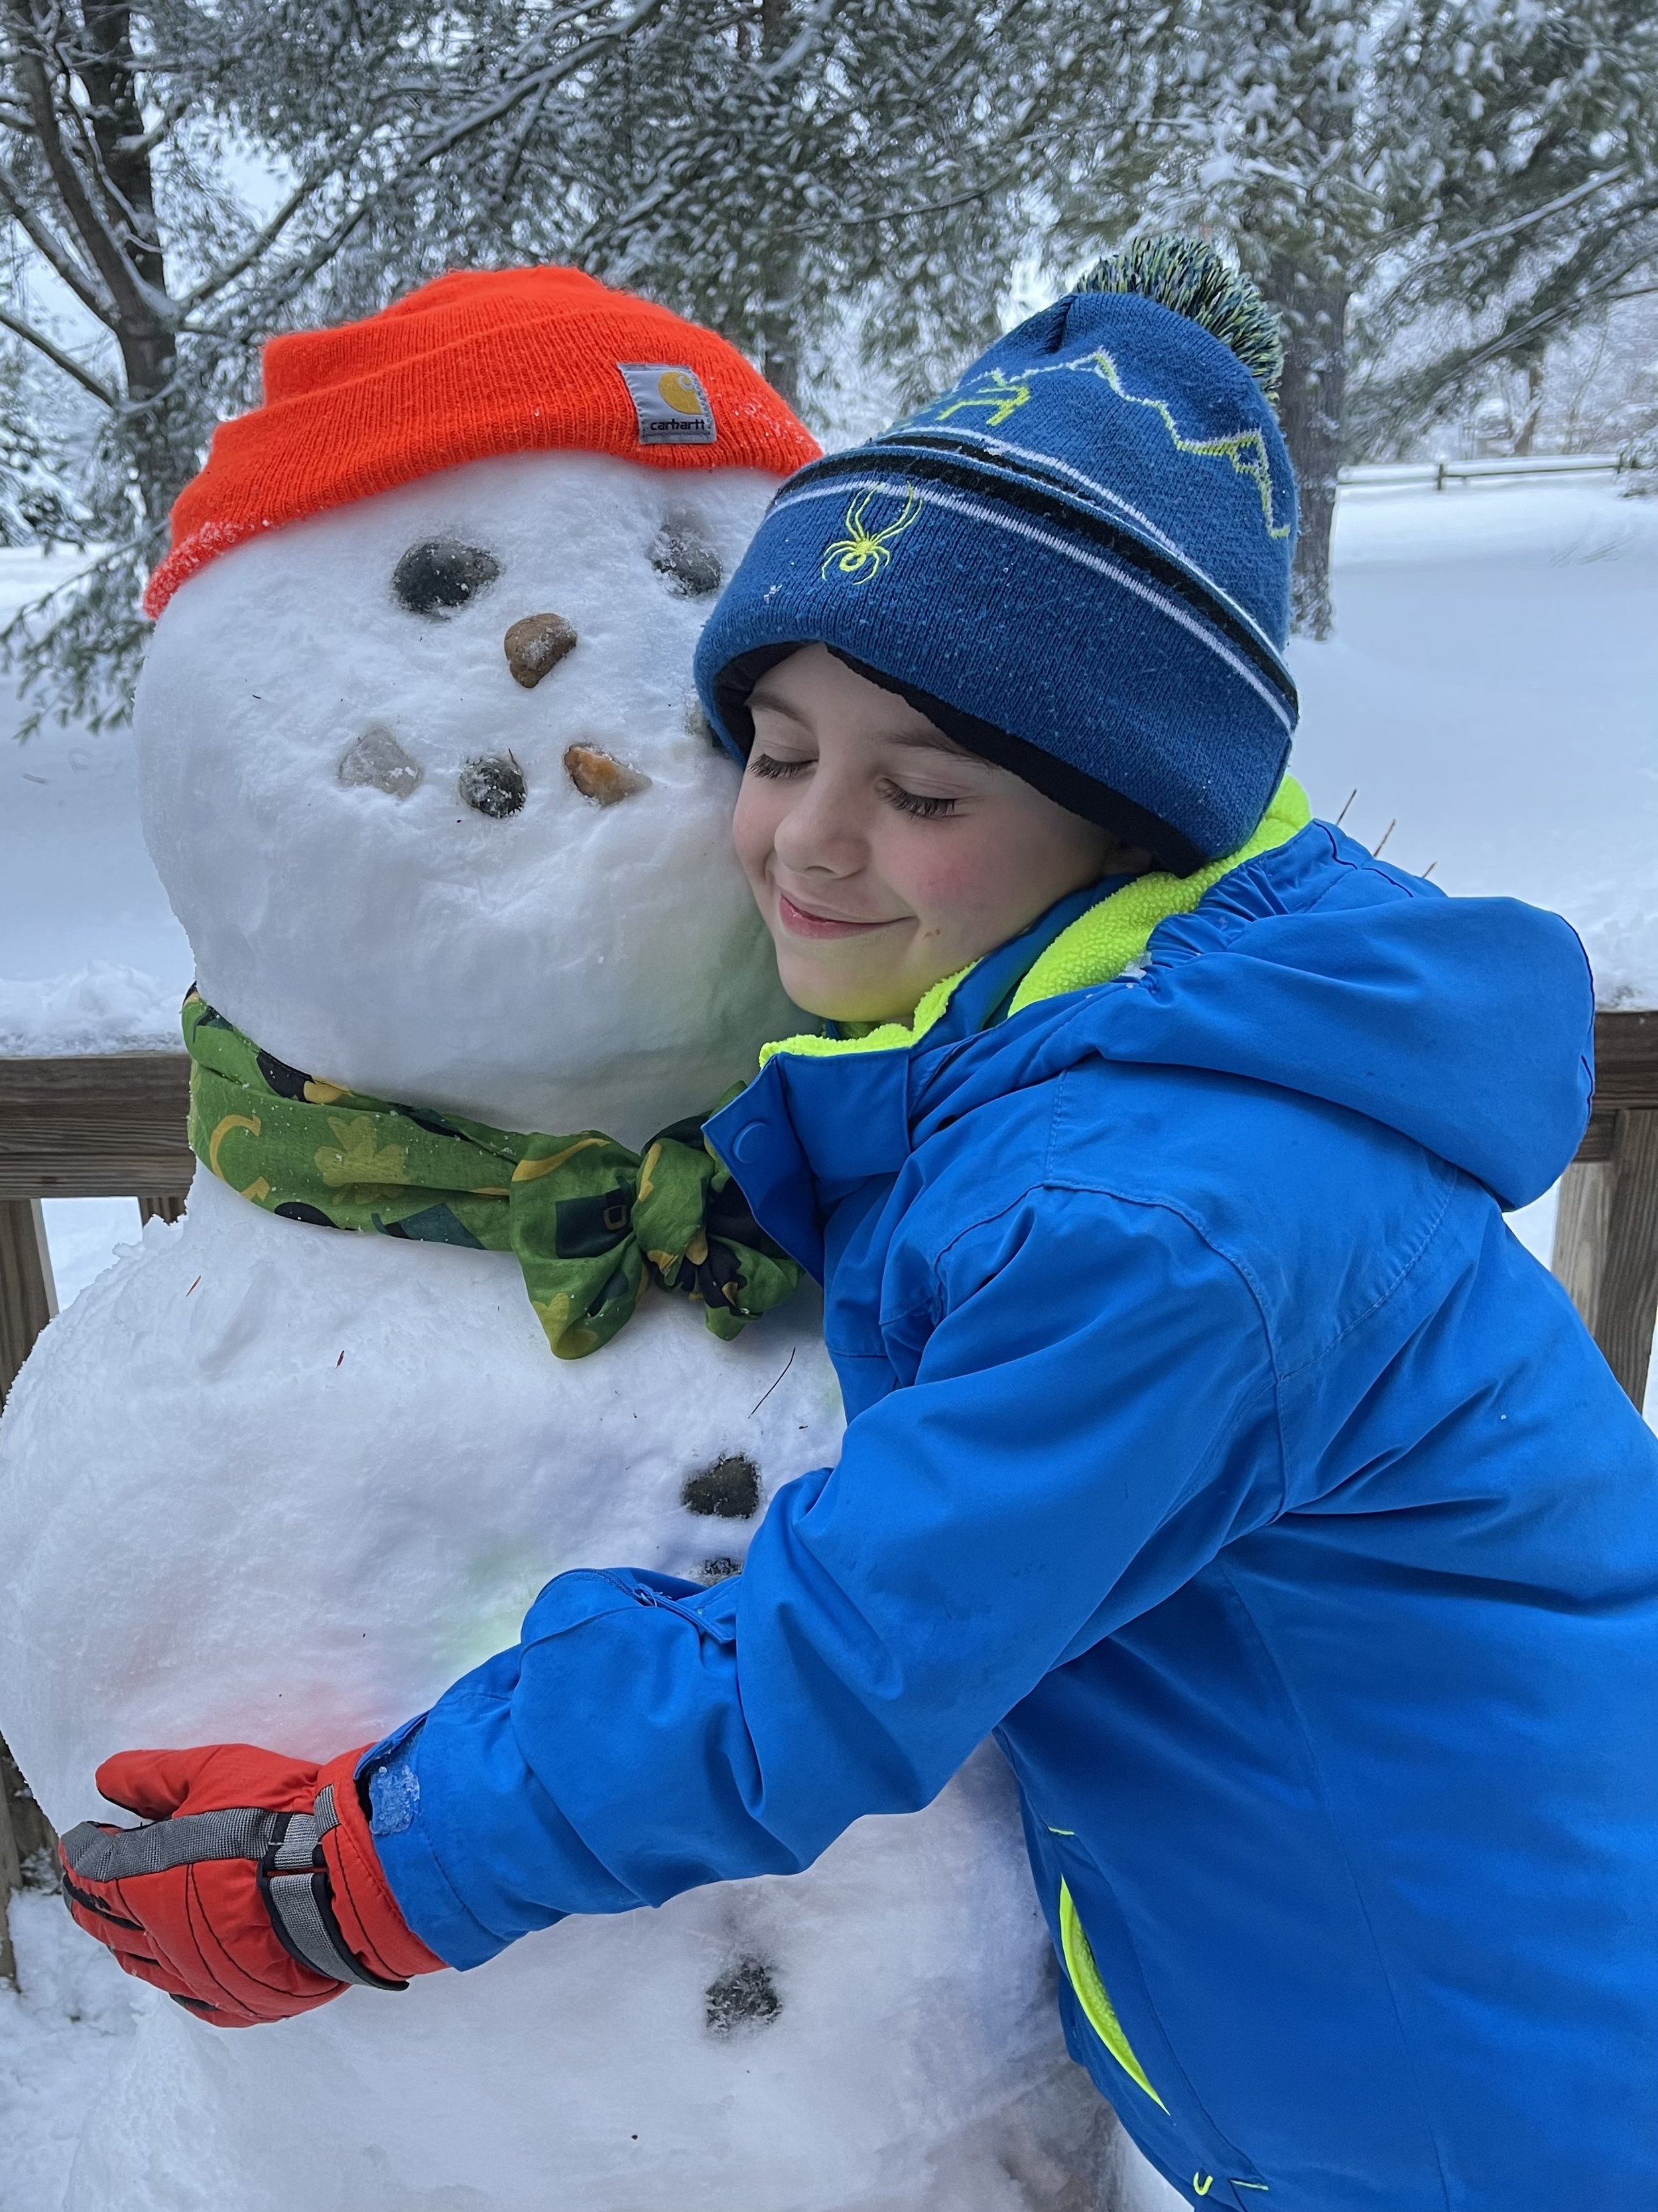   Jaxon discovered perfect snowman snow right out his back door in Stowe. Photo by Nikki Kennedy  